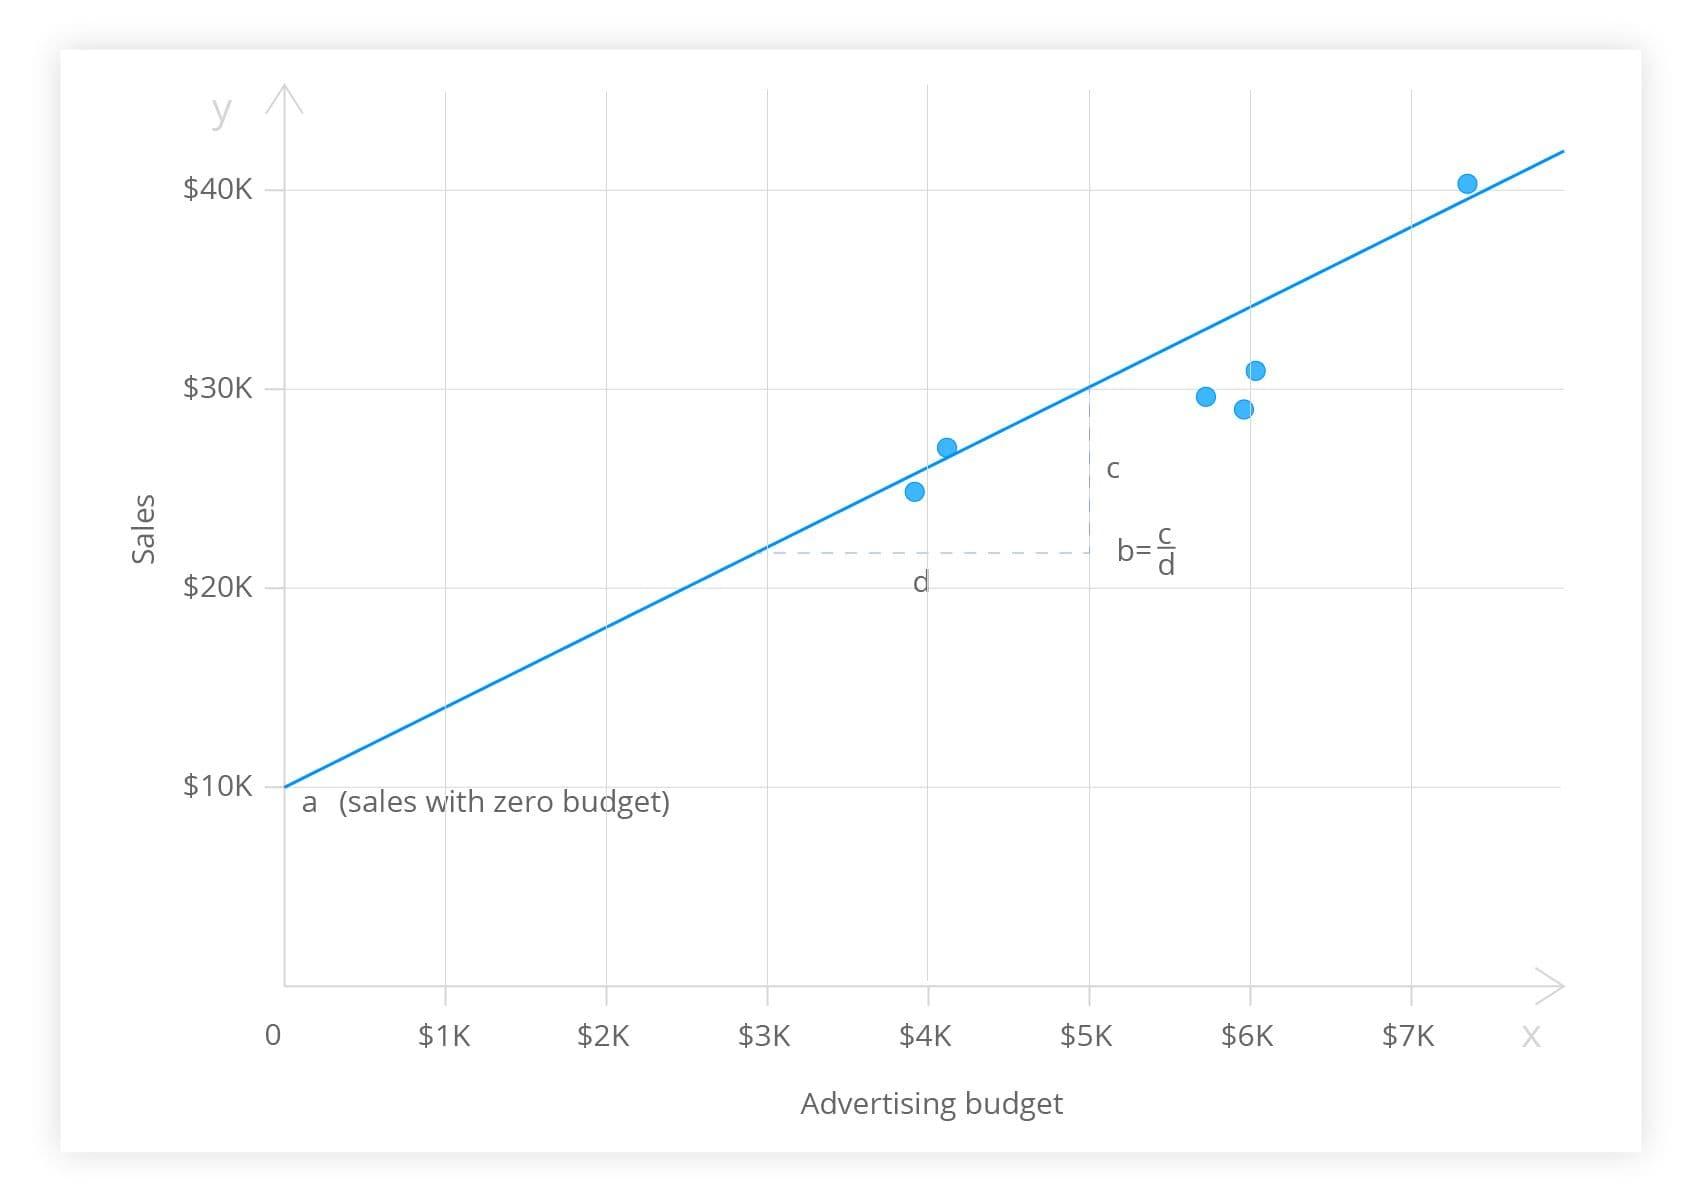 Regression line expressing the relationship between a firm’s advertising expenditures and sales